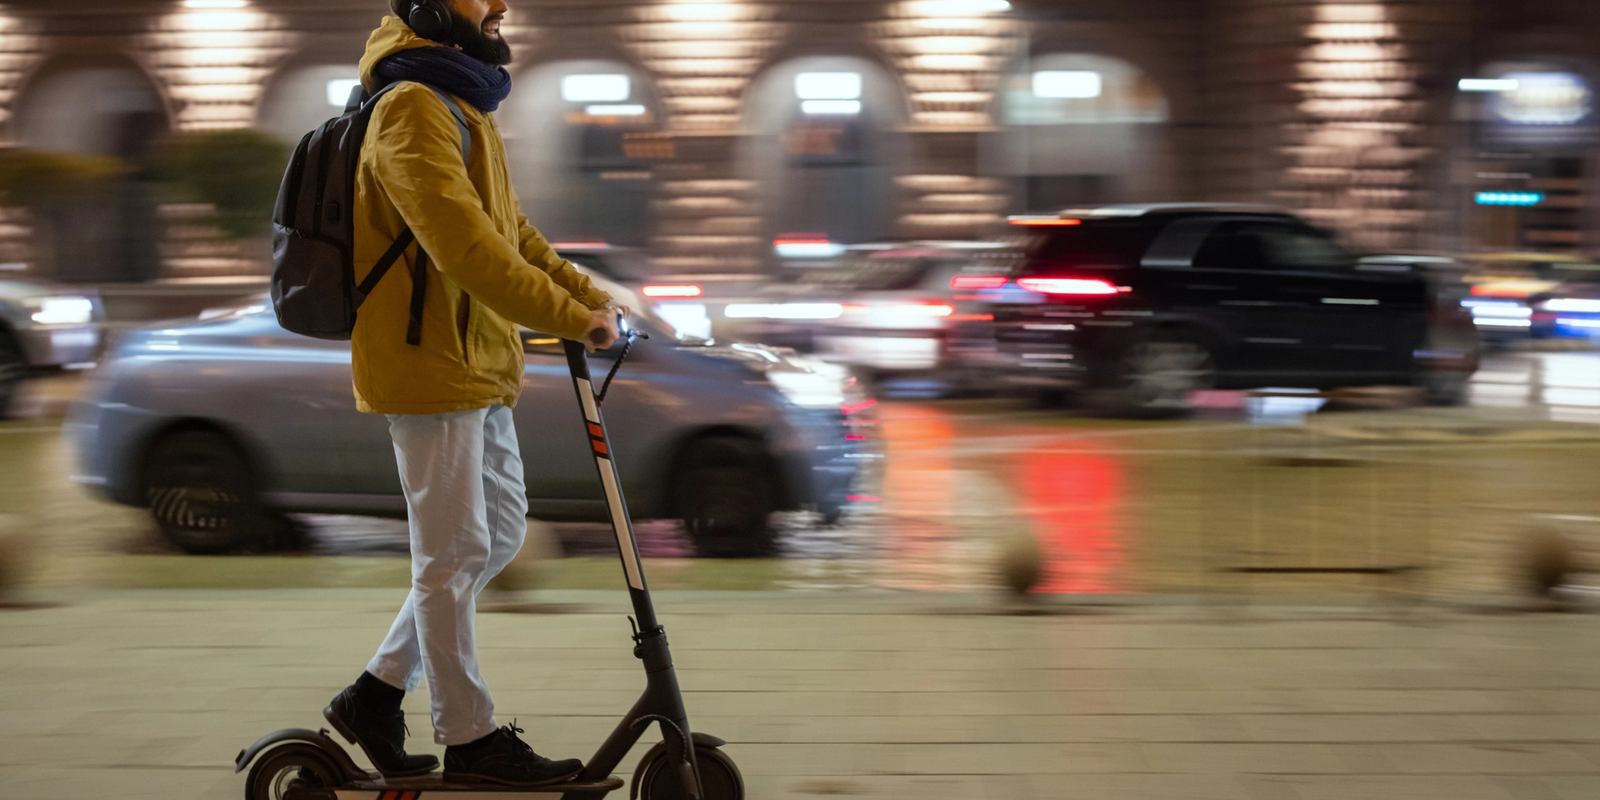 Types Of Lighting On Electric Scooters: Headlights, Taillights, Brake Lights, And More